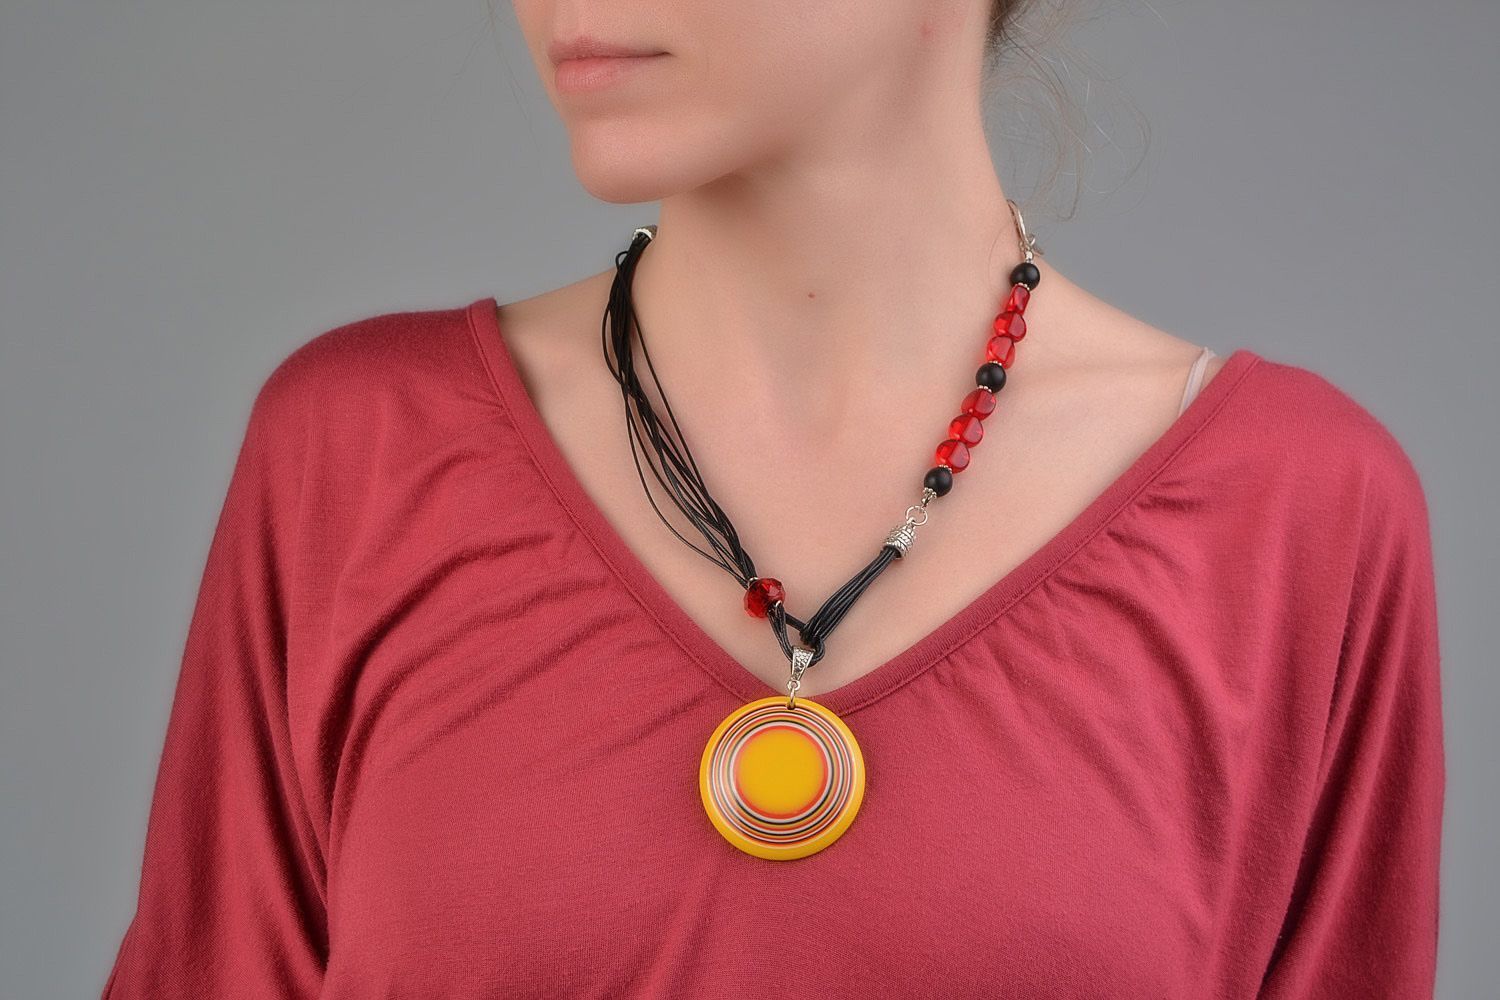 Handmade designer necklace with agate and glass beads on waxed cord for women photo 1